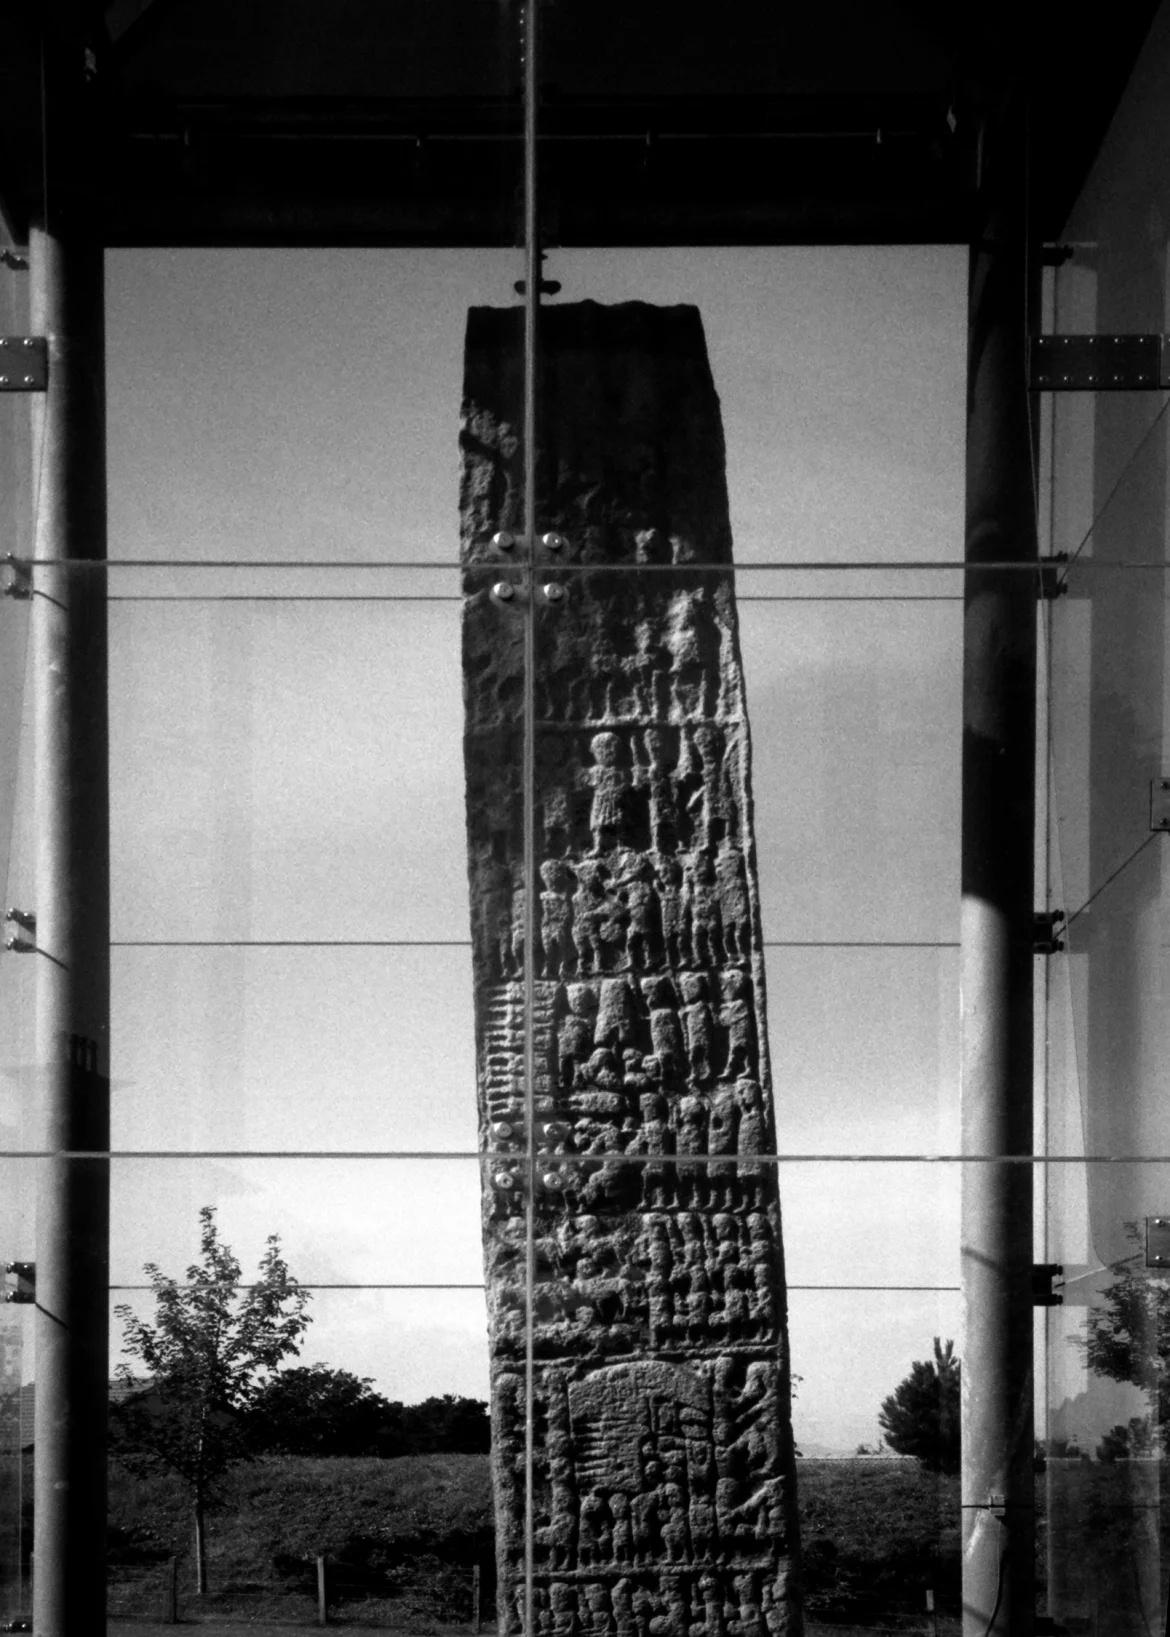 standing stone protected by glass enclosure, highlands